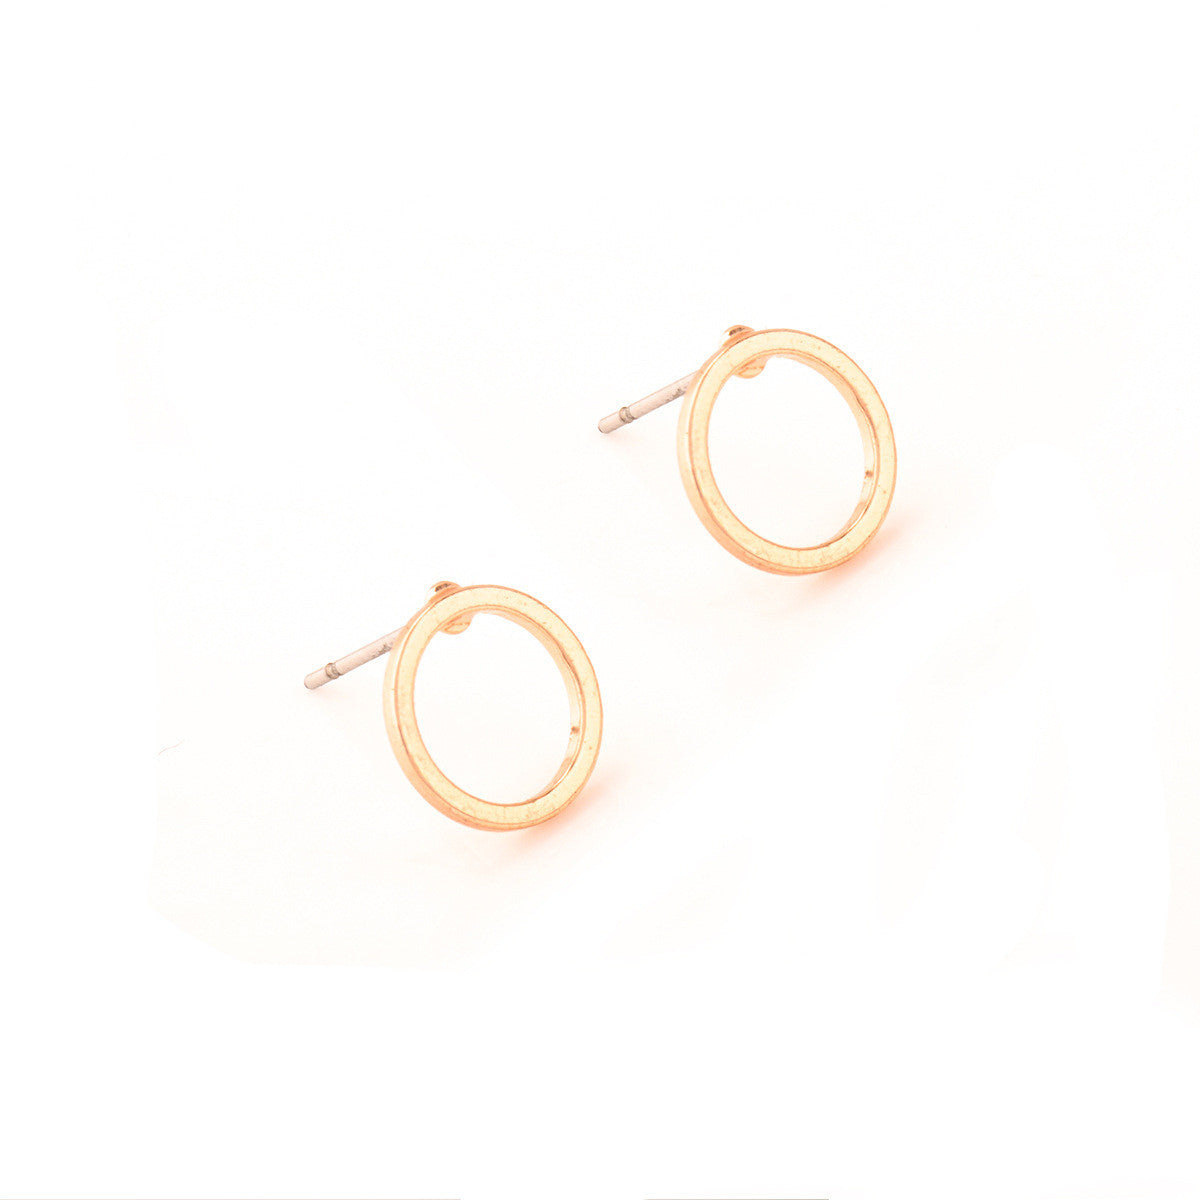 Cute Little Ring Fashion Earrings - Oh Yours Fashion - 5